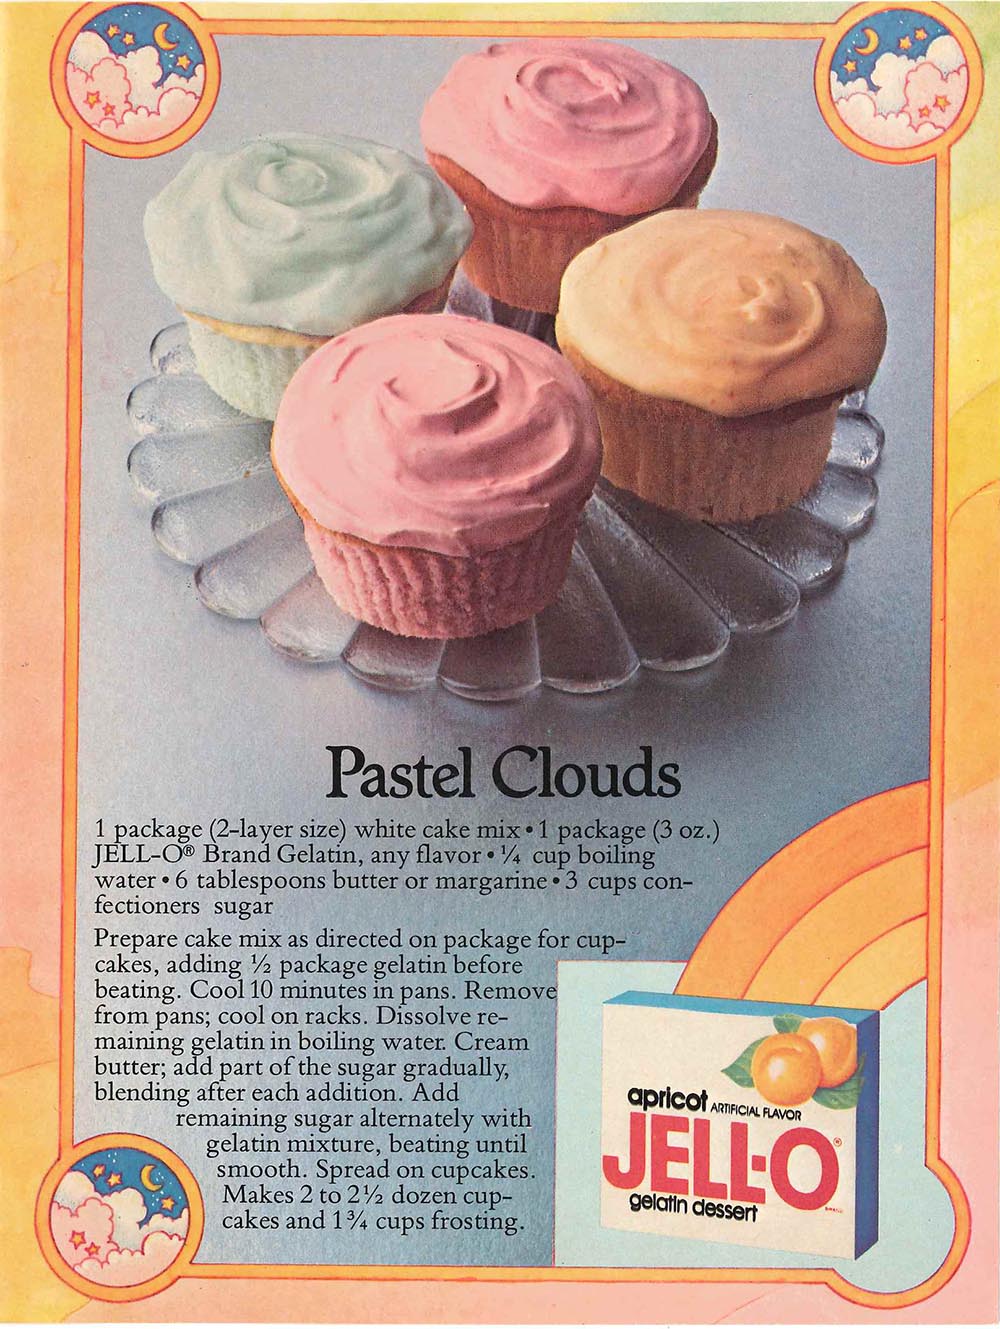 Page with recipe for Pastel Clouds, showing four finished cupcakes in pink, orange, and green.